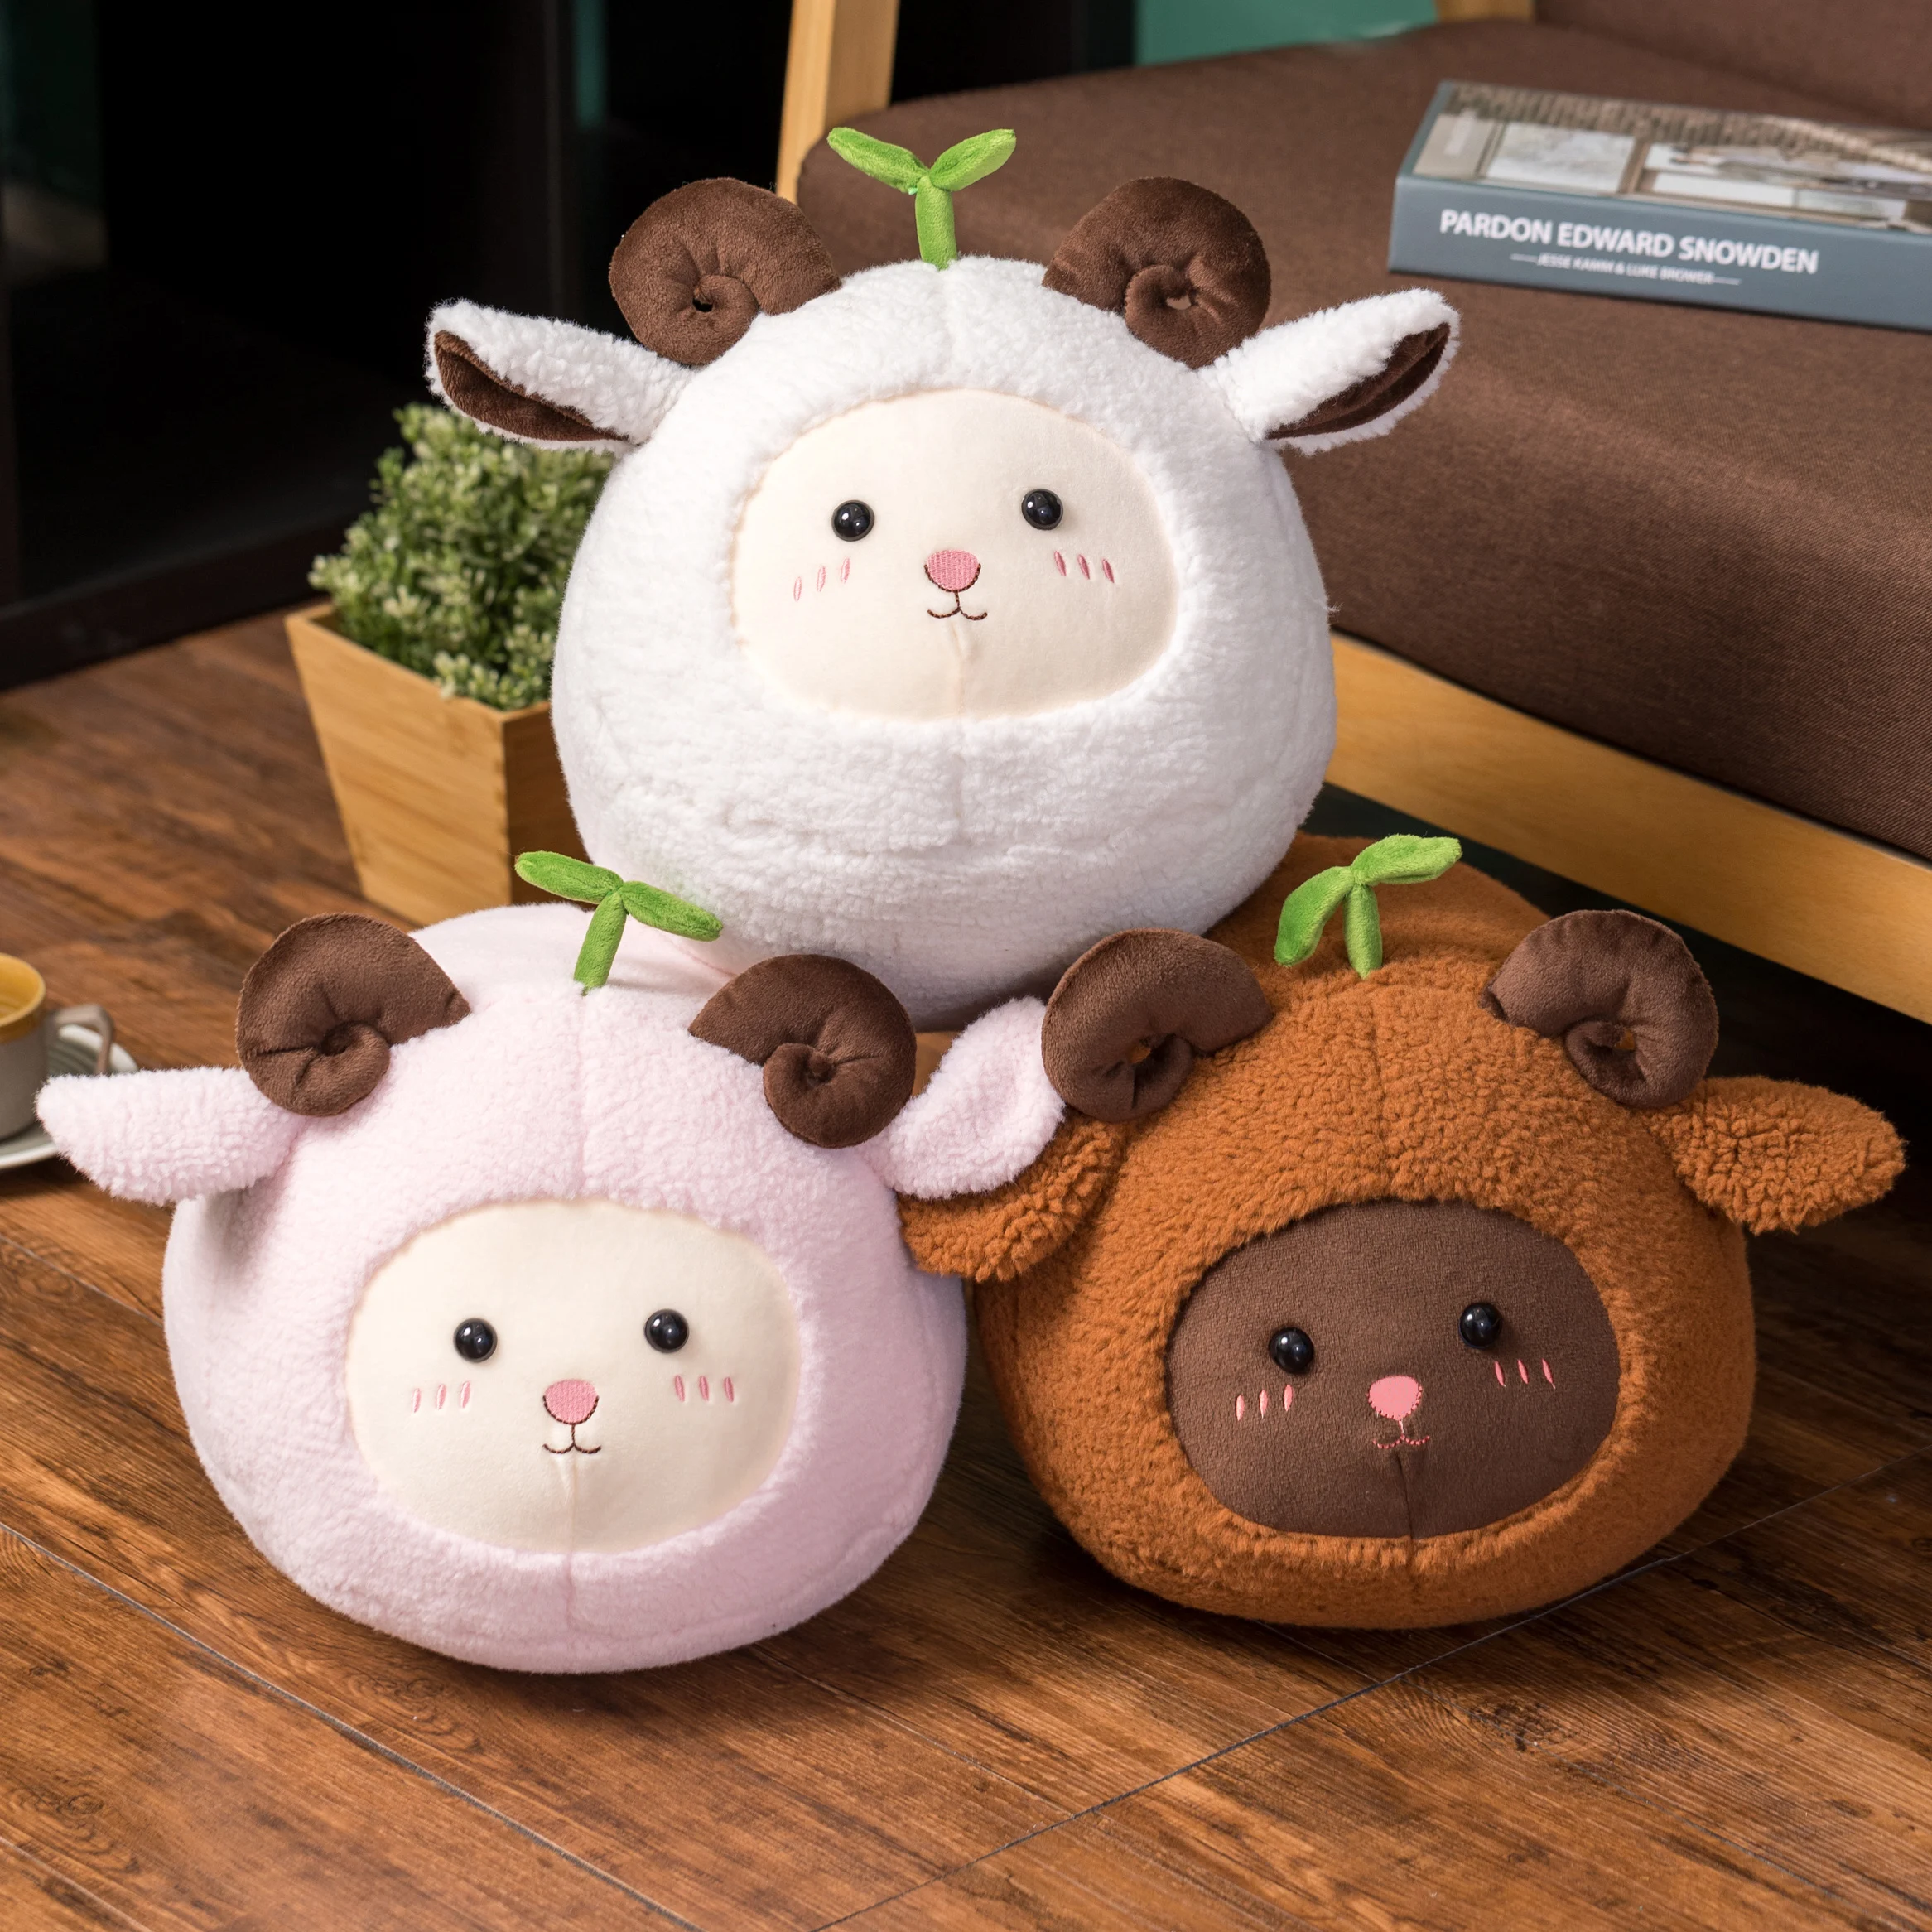 Cute Sheep Plush Toy Stuffed Animal Fat Shaped Sheep Soft Doll Goat Throw Pillow Kids Toys Birthday Christmas Gift for Children